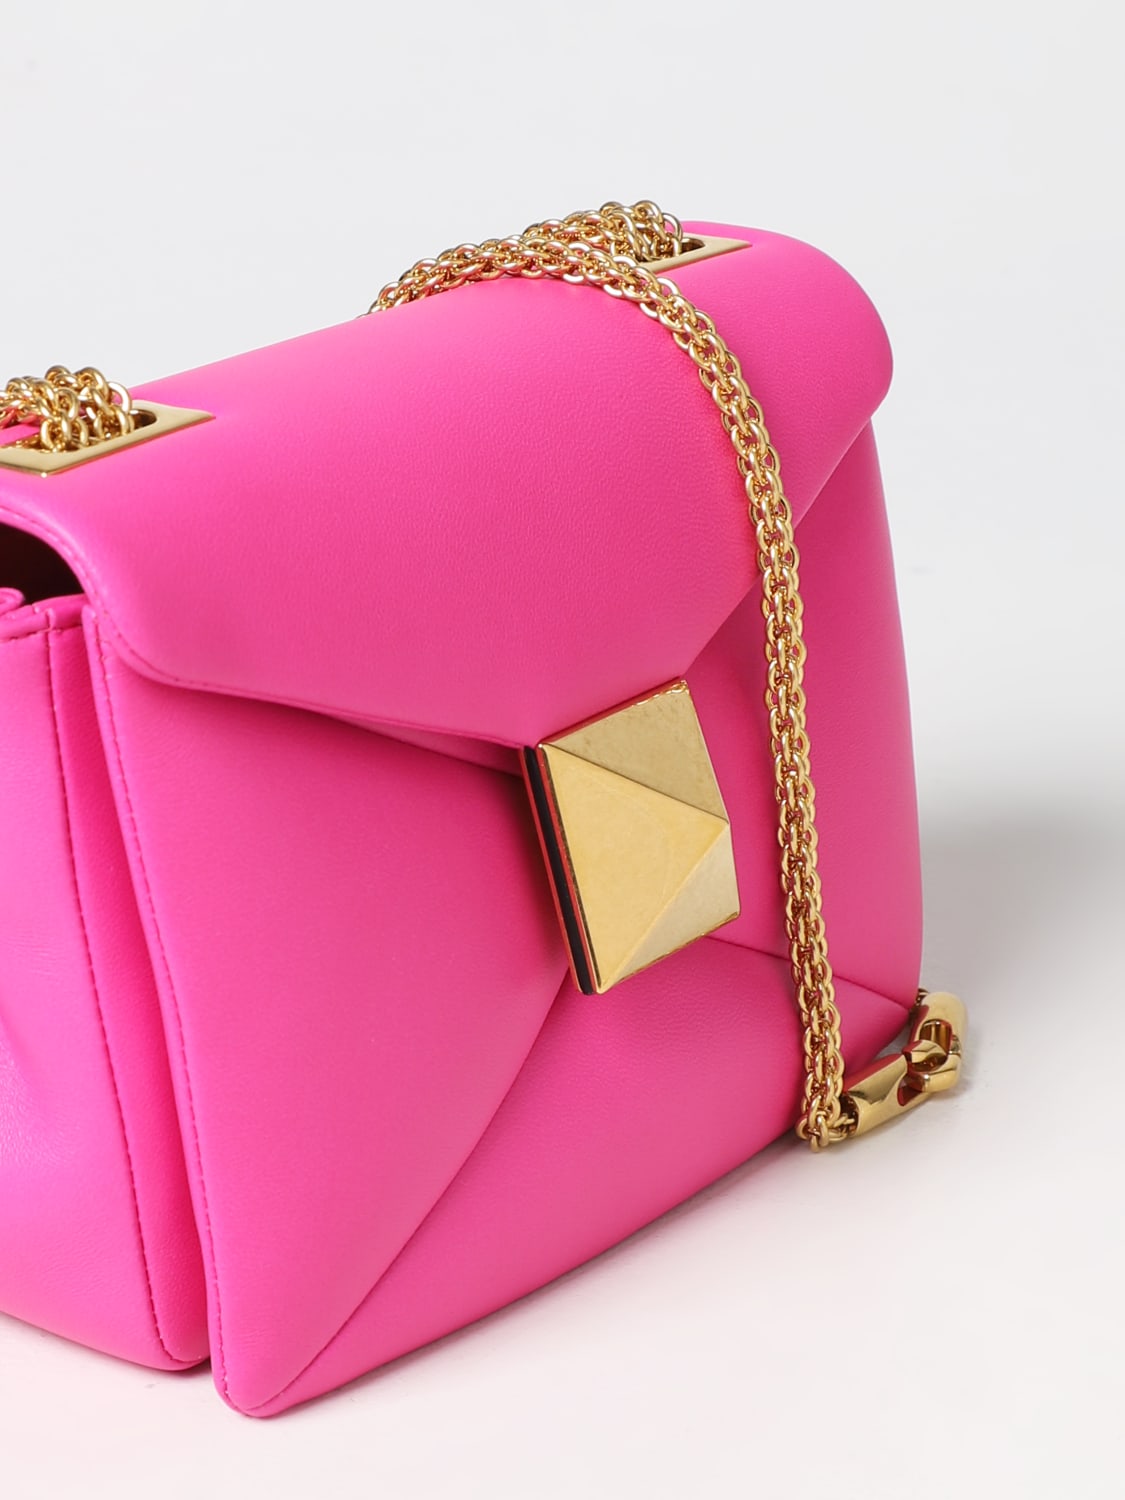 VALENTINO GARAVANI: One Stud bag in quilted nappa leather - Pink 